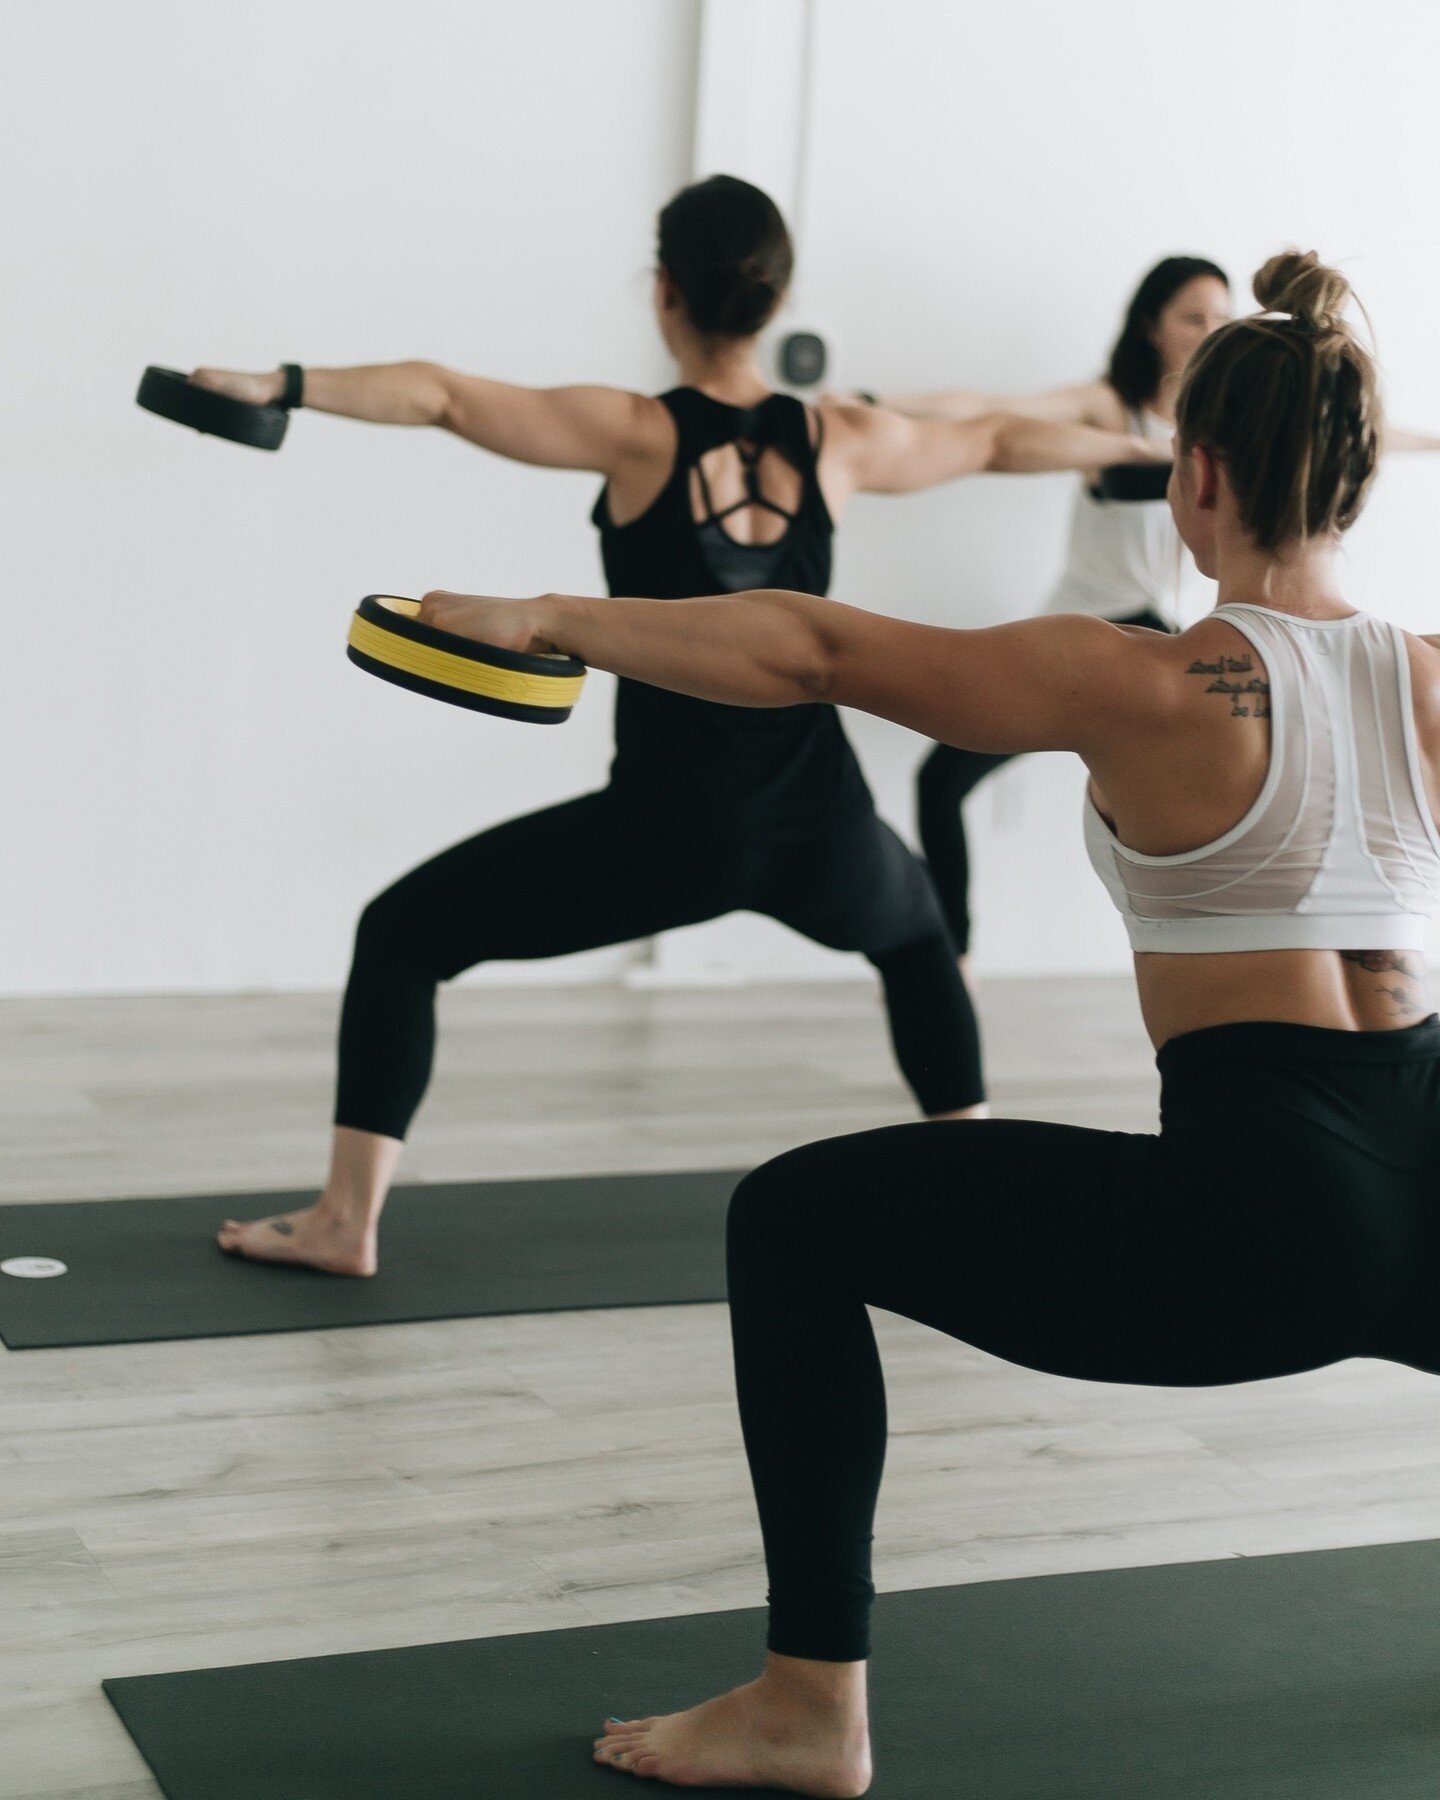 Try Carrie&rsquo;s NuSculpt + Stretch on Sundays at 9 AM! The longer format allows for a bit more stretching to pair with the NuSculpt sequence! 💛

#yoga #sculpt #nashvillefitness #yogacommunity #selfcare #wellness #workout #yogastudio